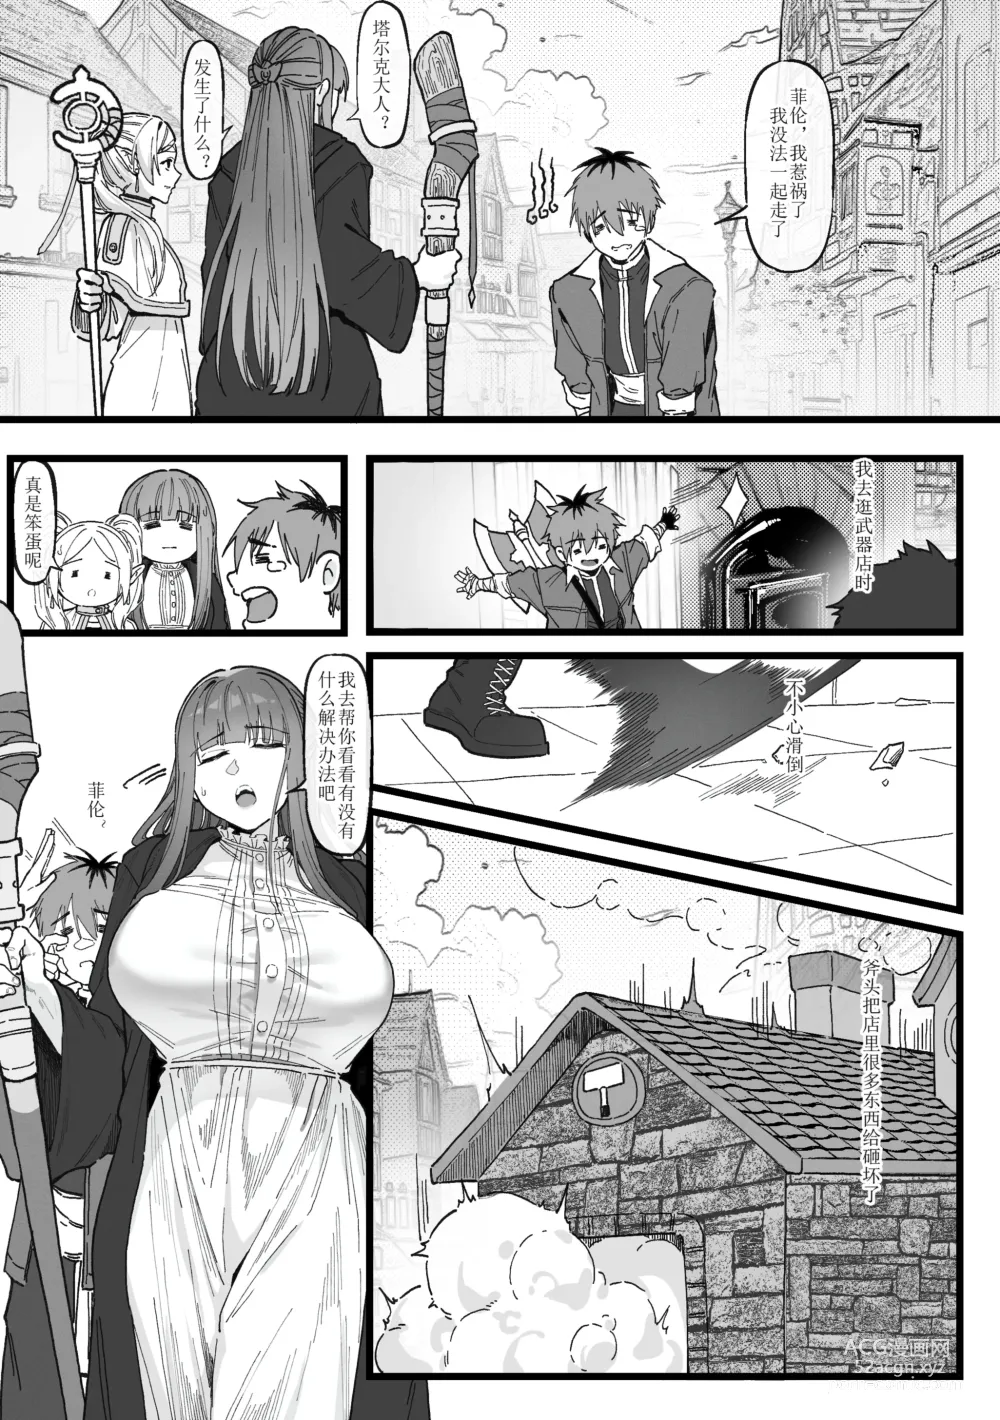 Page 2 of doujinshi 与冒失的塔尔克大人一起冒险